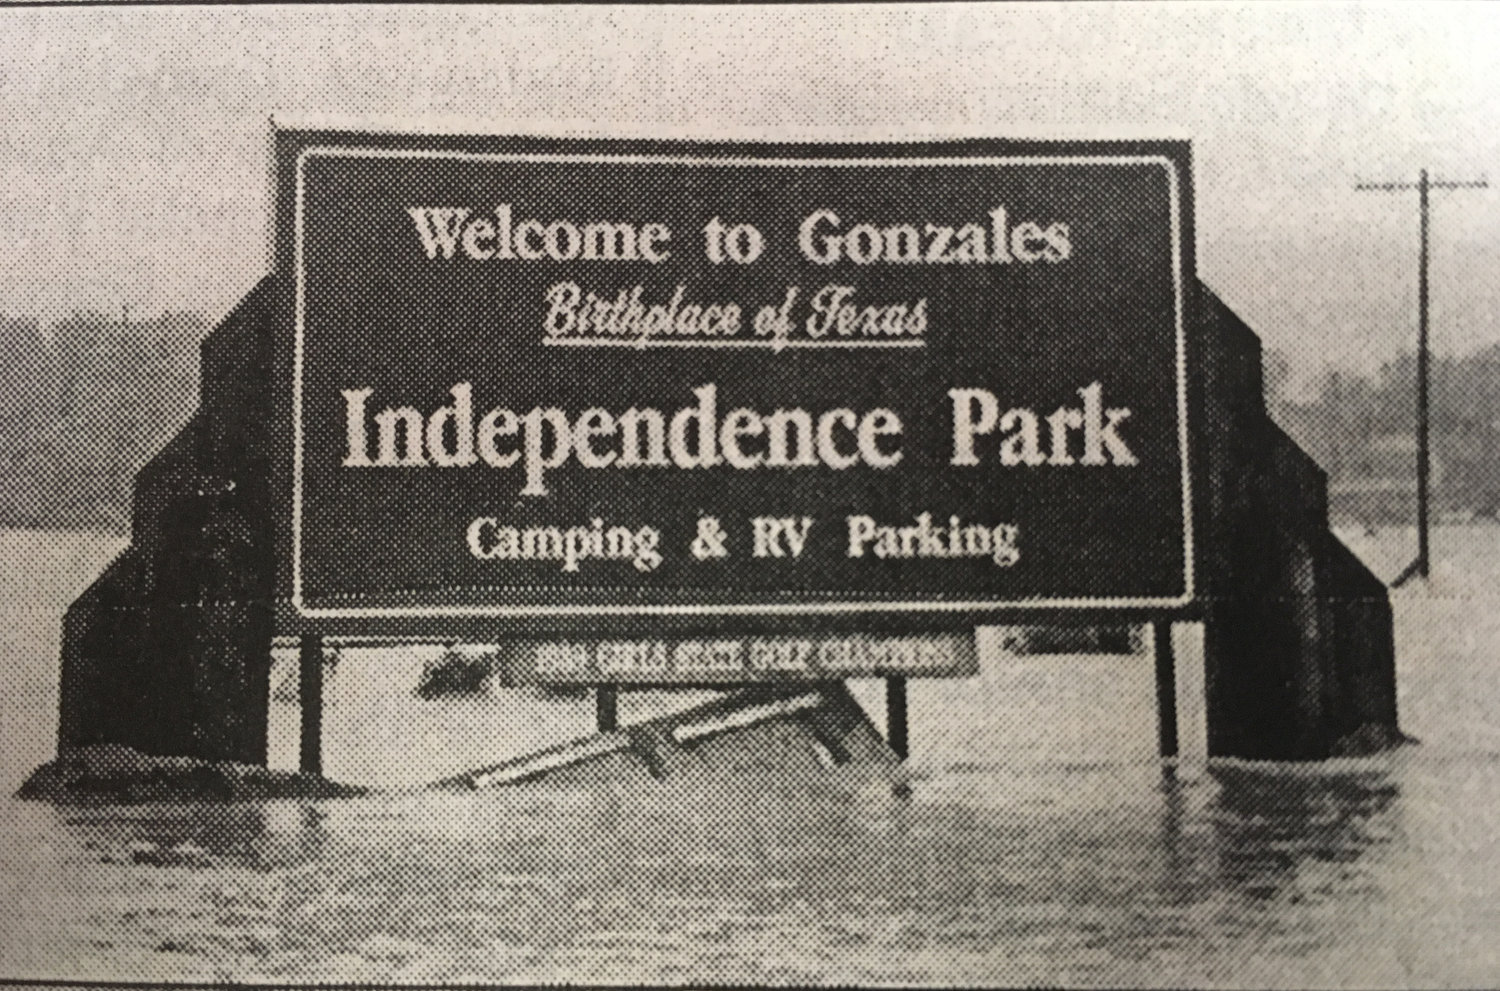 Scenes from around Gonzales after the record breaking flood experienced here on Oct. 18, 1998.